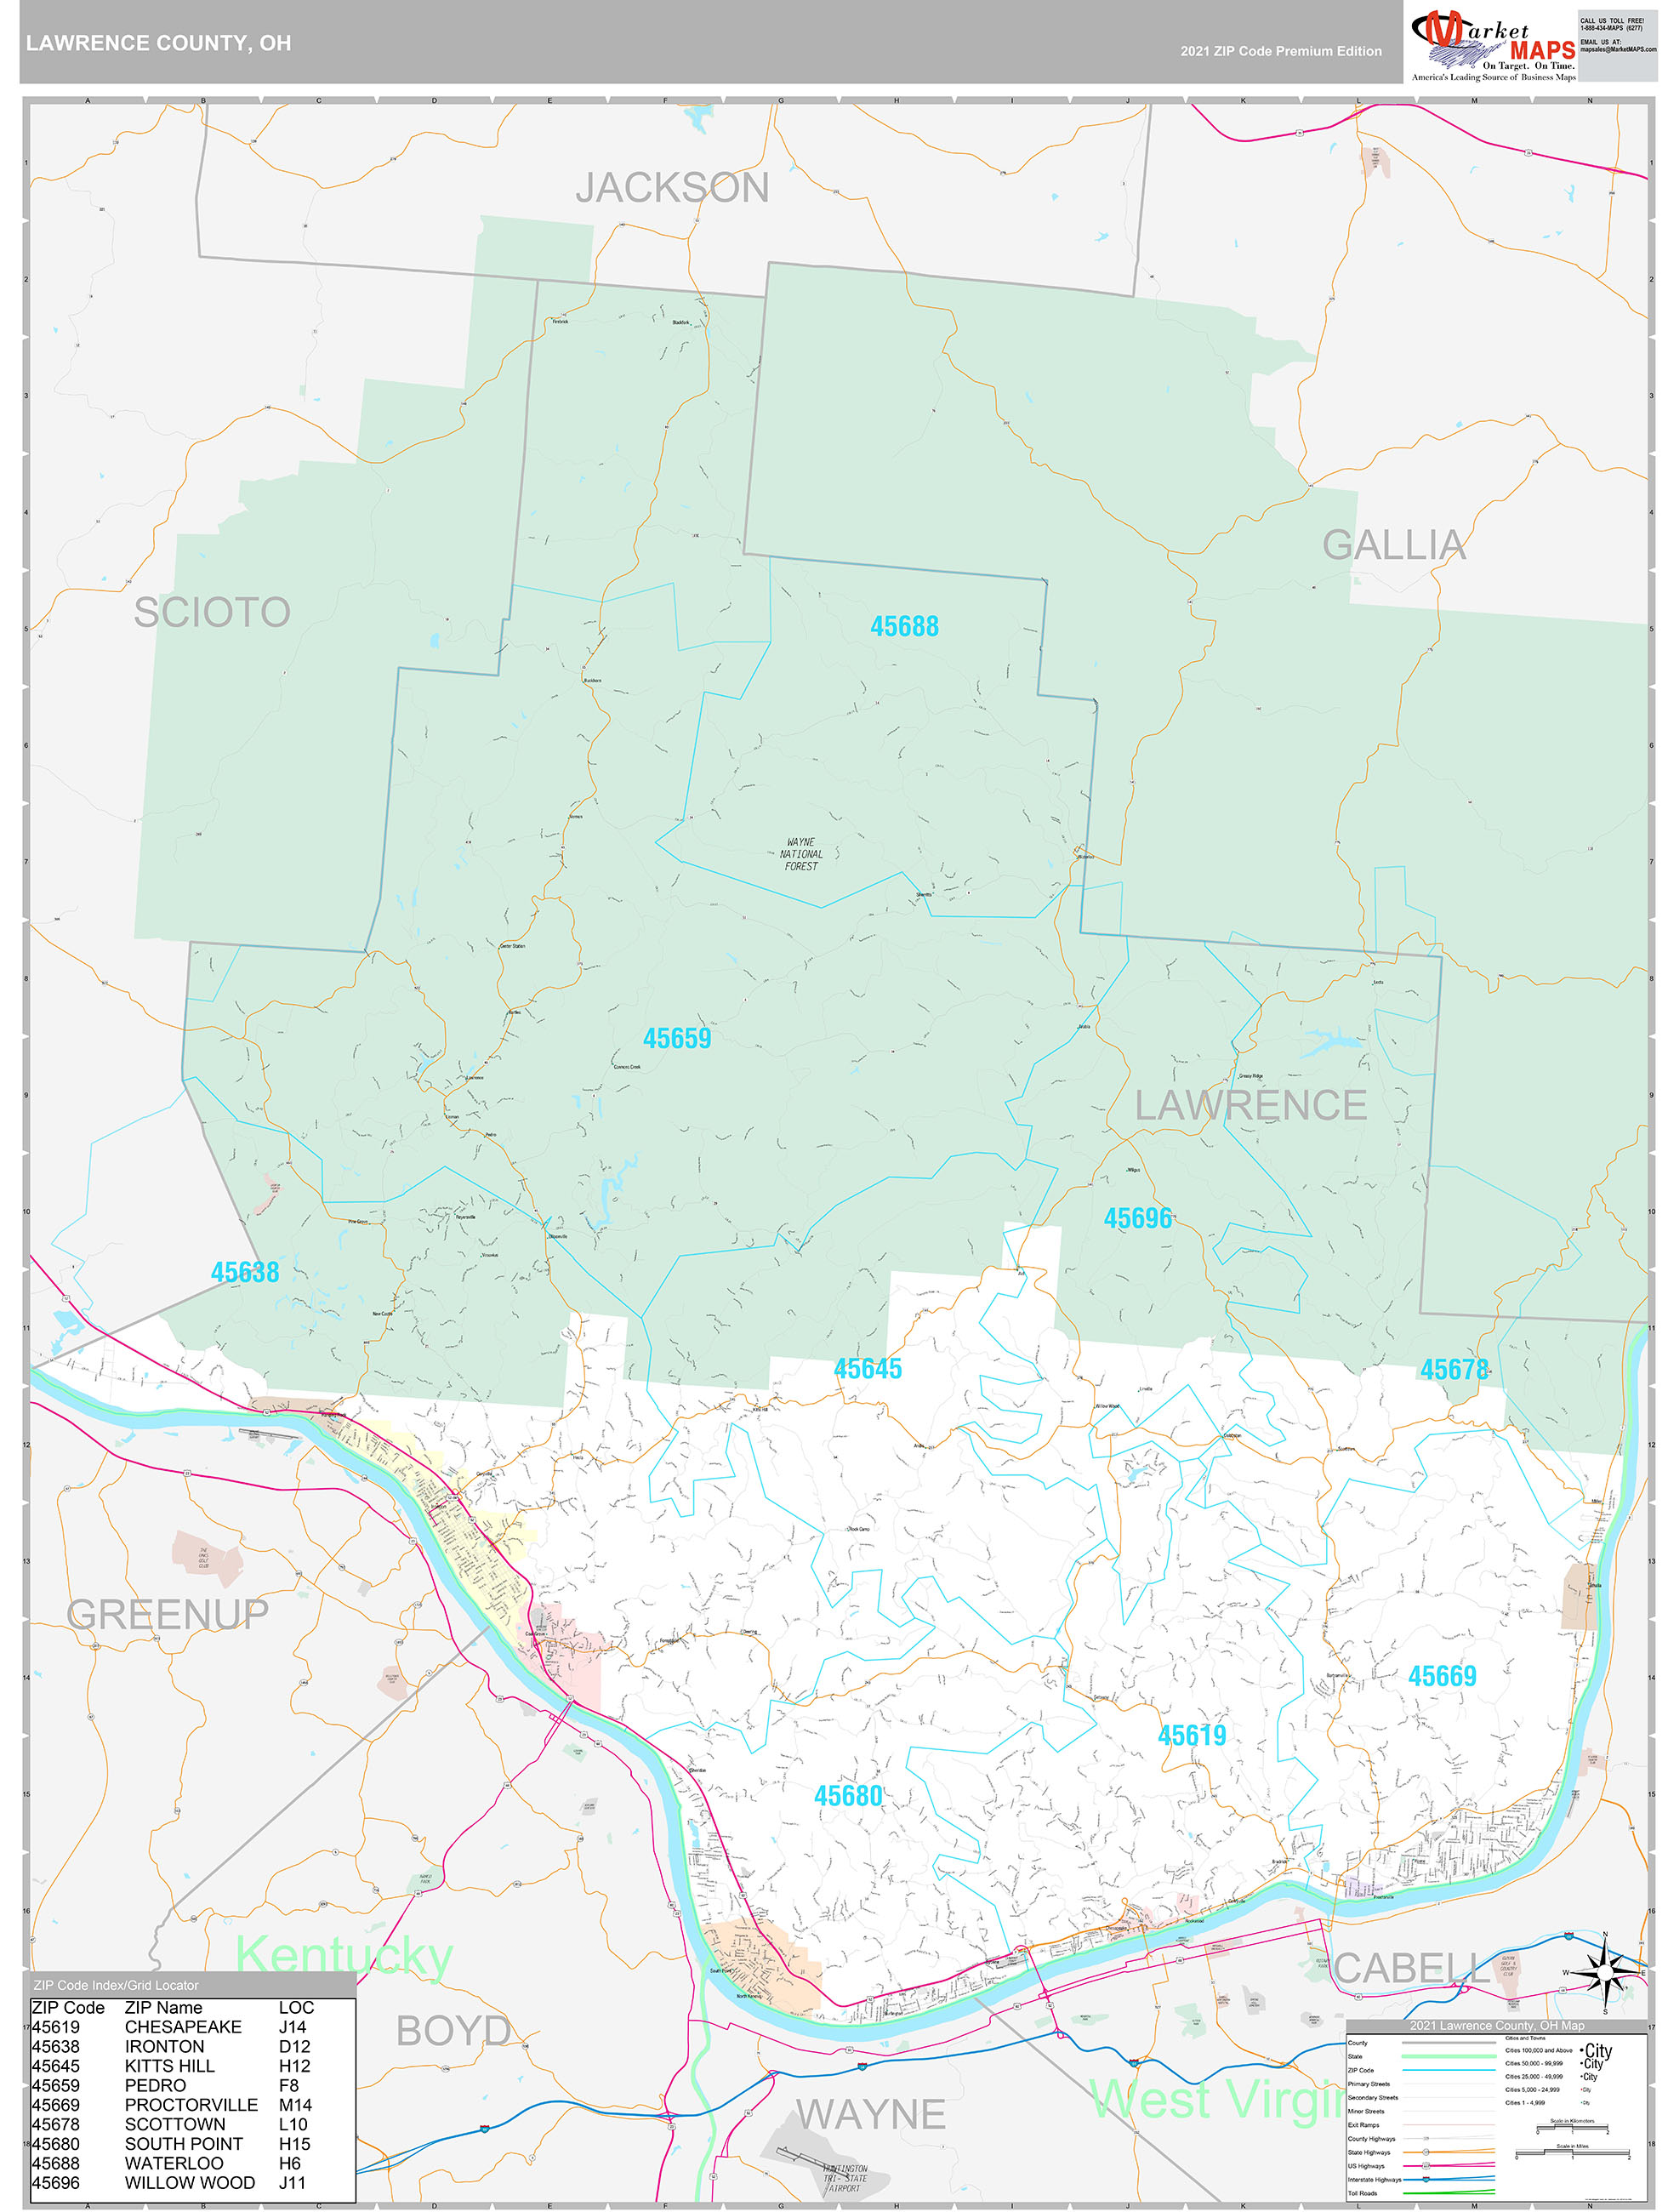 Lawrence County, OH Wall Map Premium Style by MarketMAPS